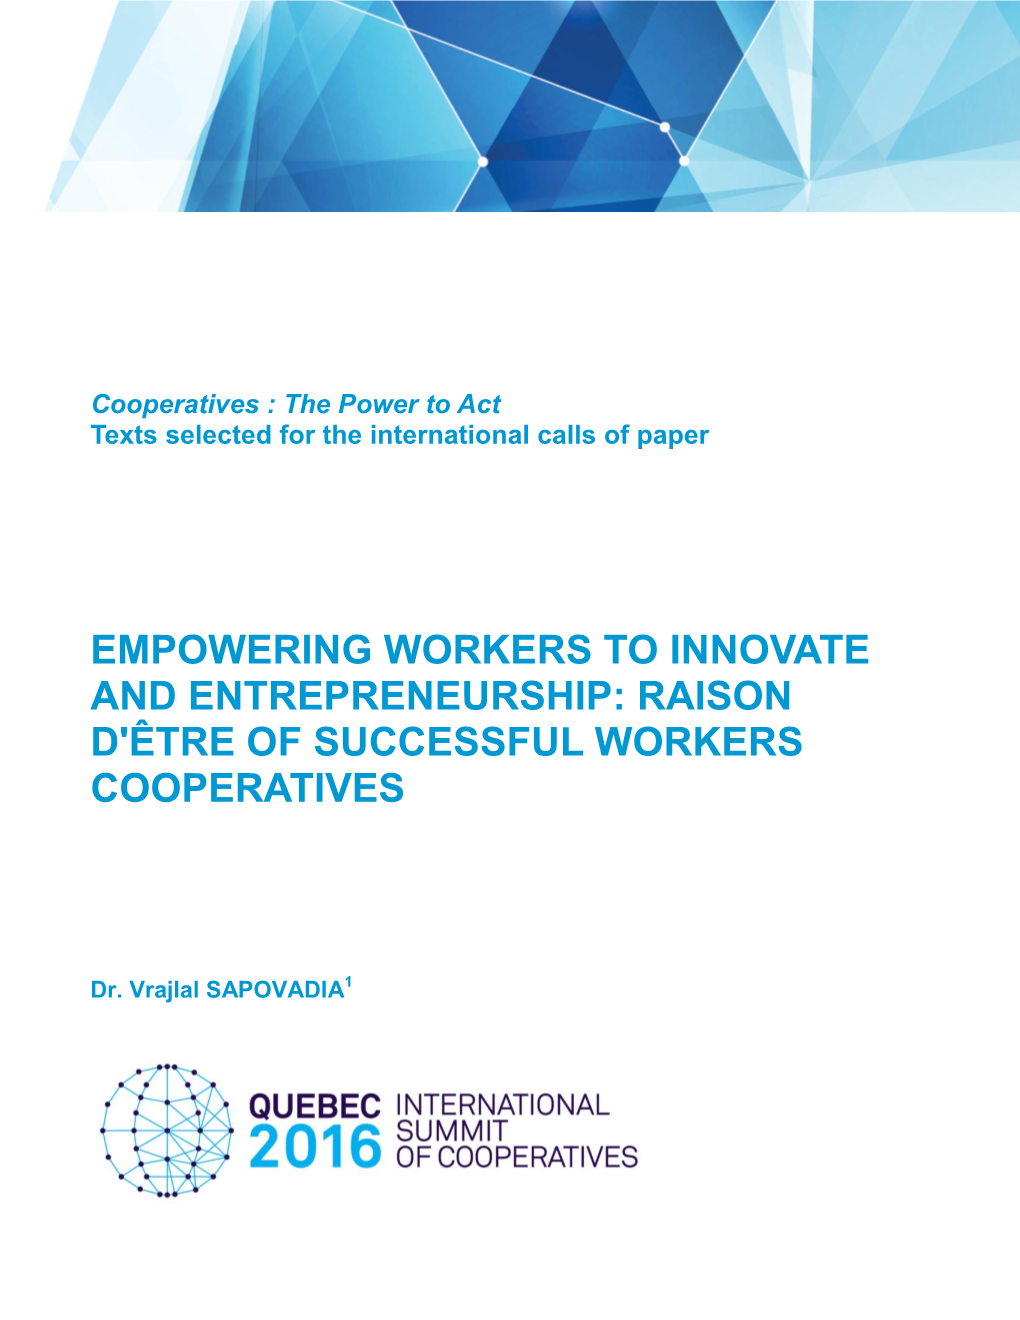 What Works for Workers' Cooperatives? Empirical Research on Success & Failure of Indian Workers' Cooperatives, ILO Workshop, Geneva